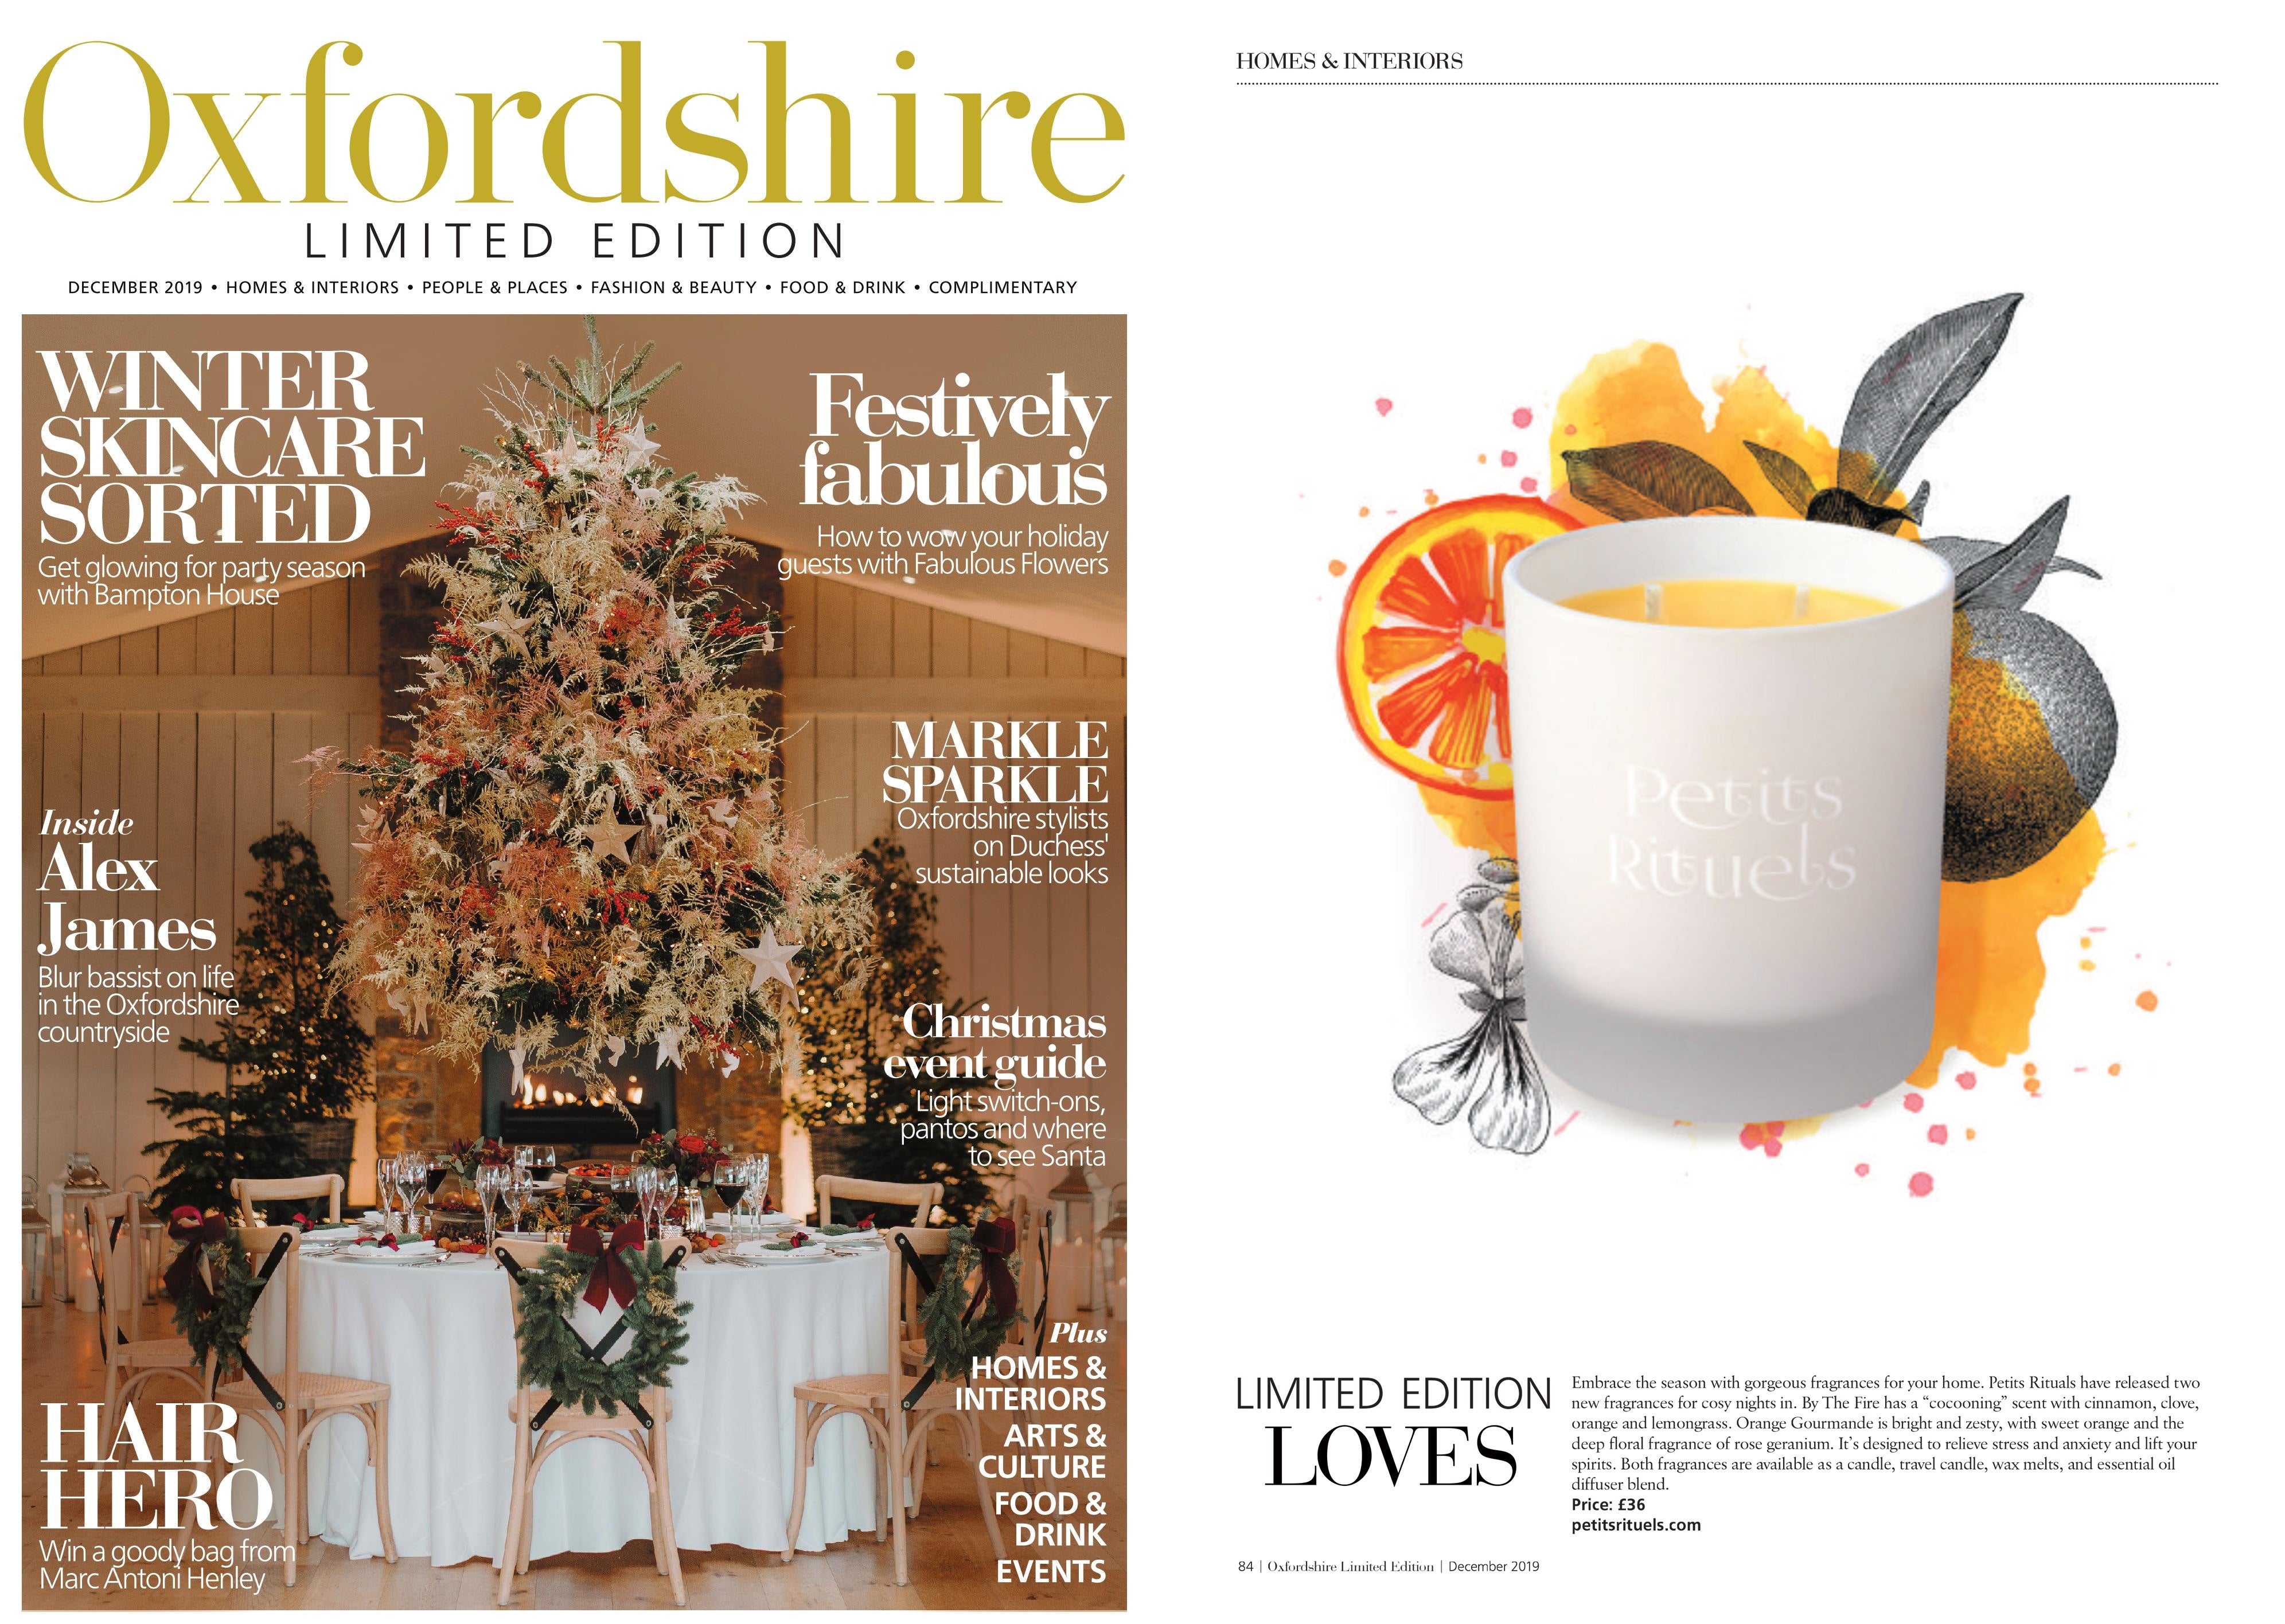 Oxfordshire Limited Edition December 2019 feature of Petits Rituels Orange Gourmande candle.